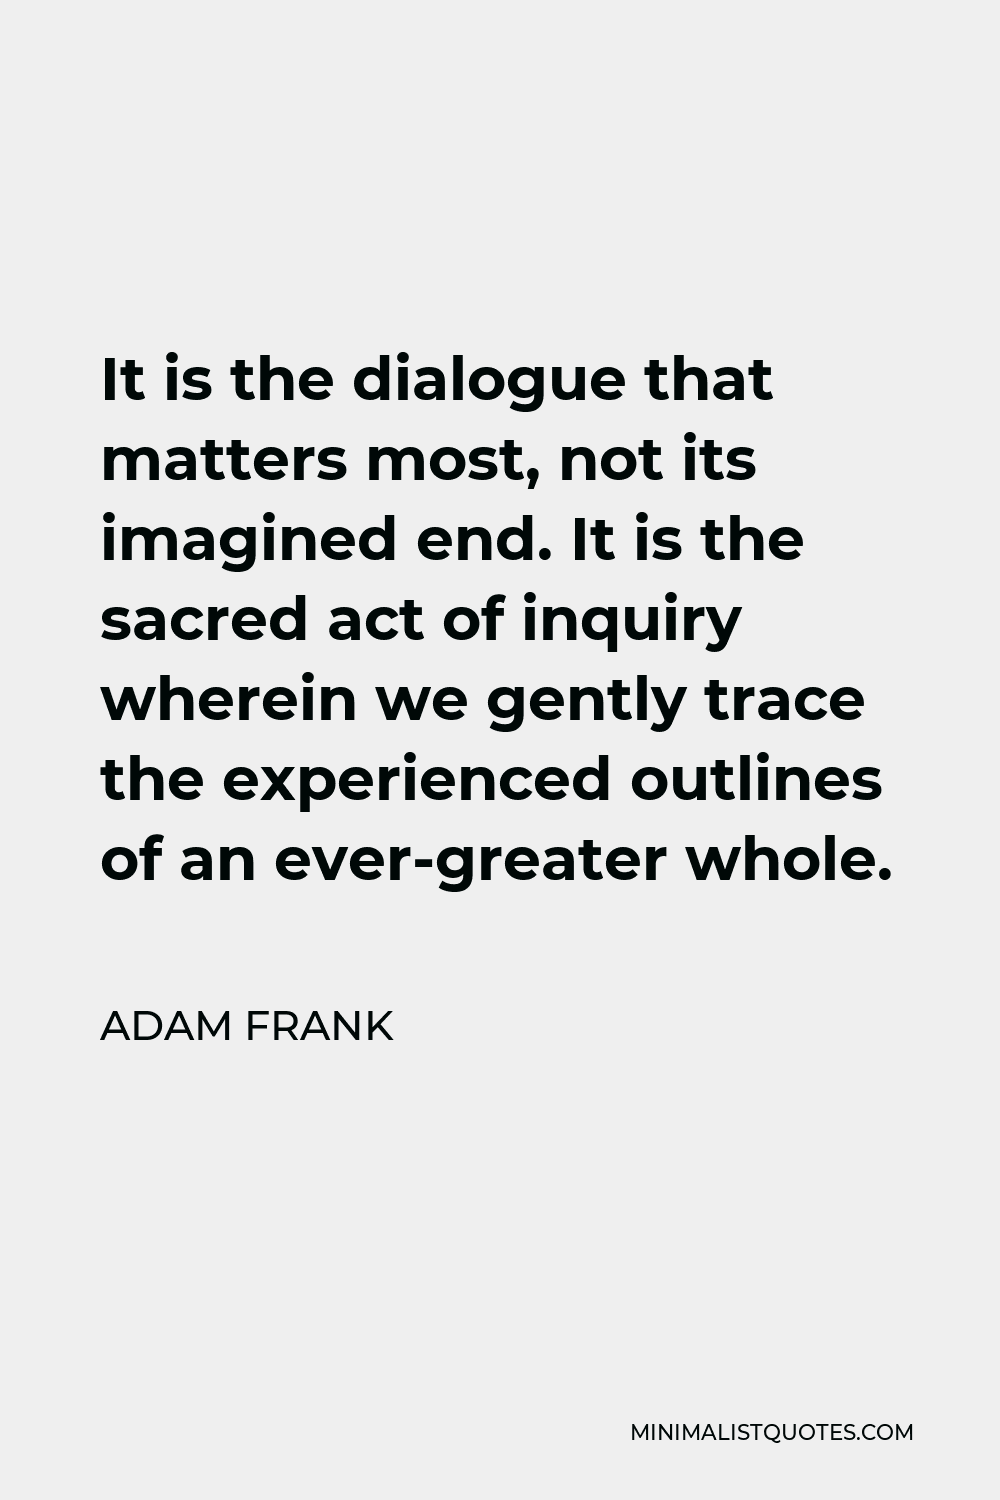 Adam Frank Quote - It is the dialogue that matters most, not its imagined end. It is the sacred act of inquiry wherein we gently trace the experienced outlines of an ever-greater whole.